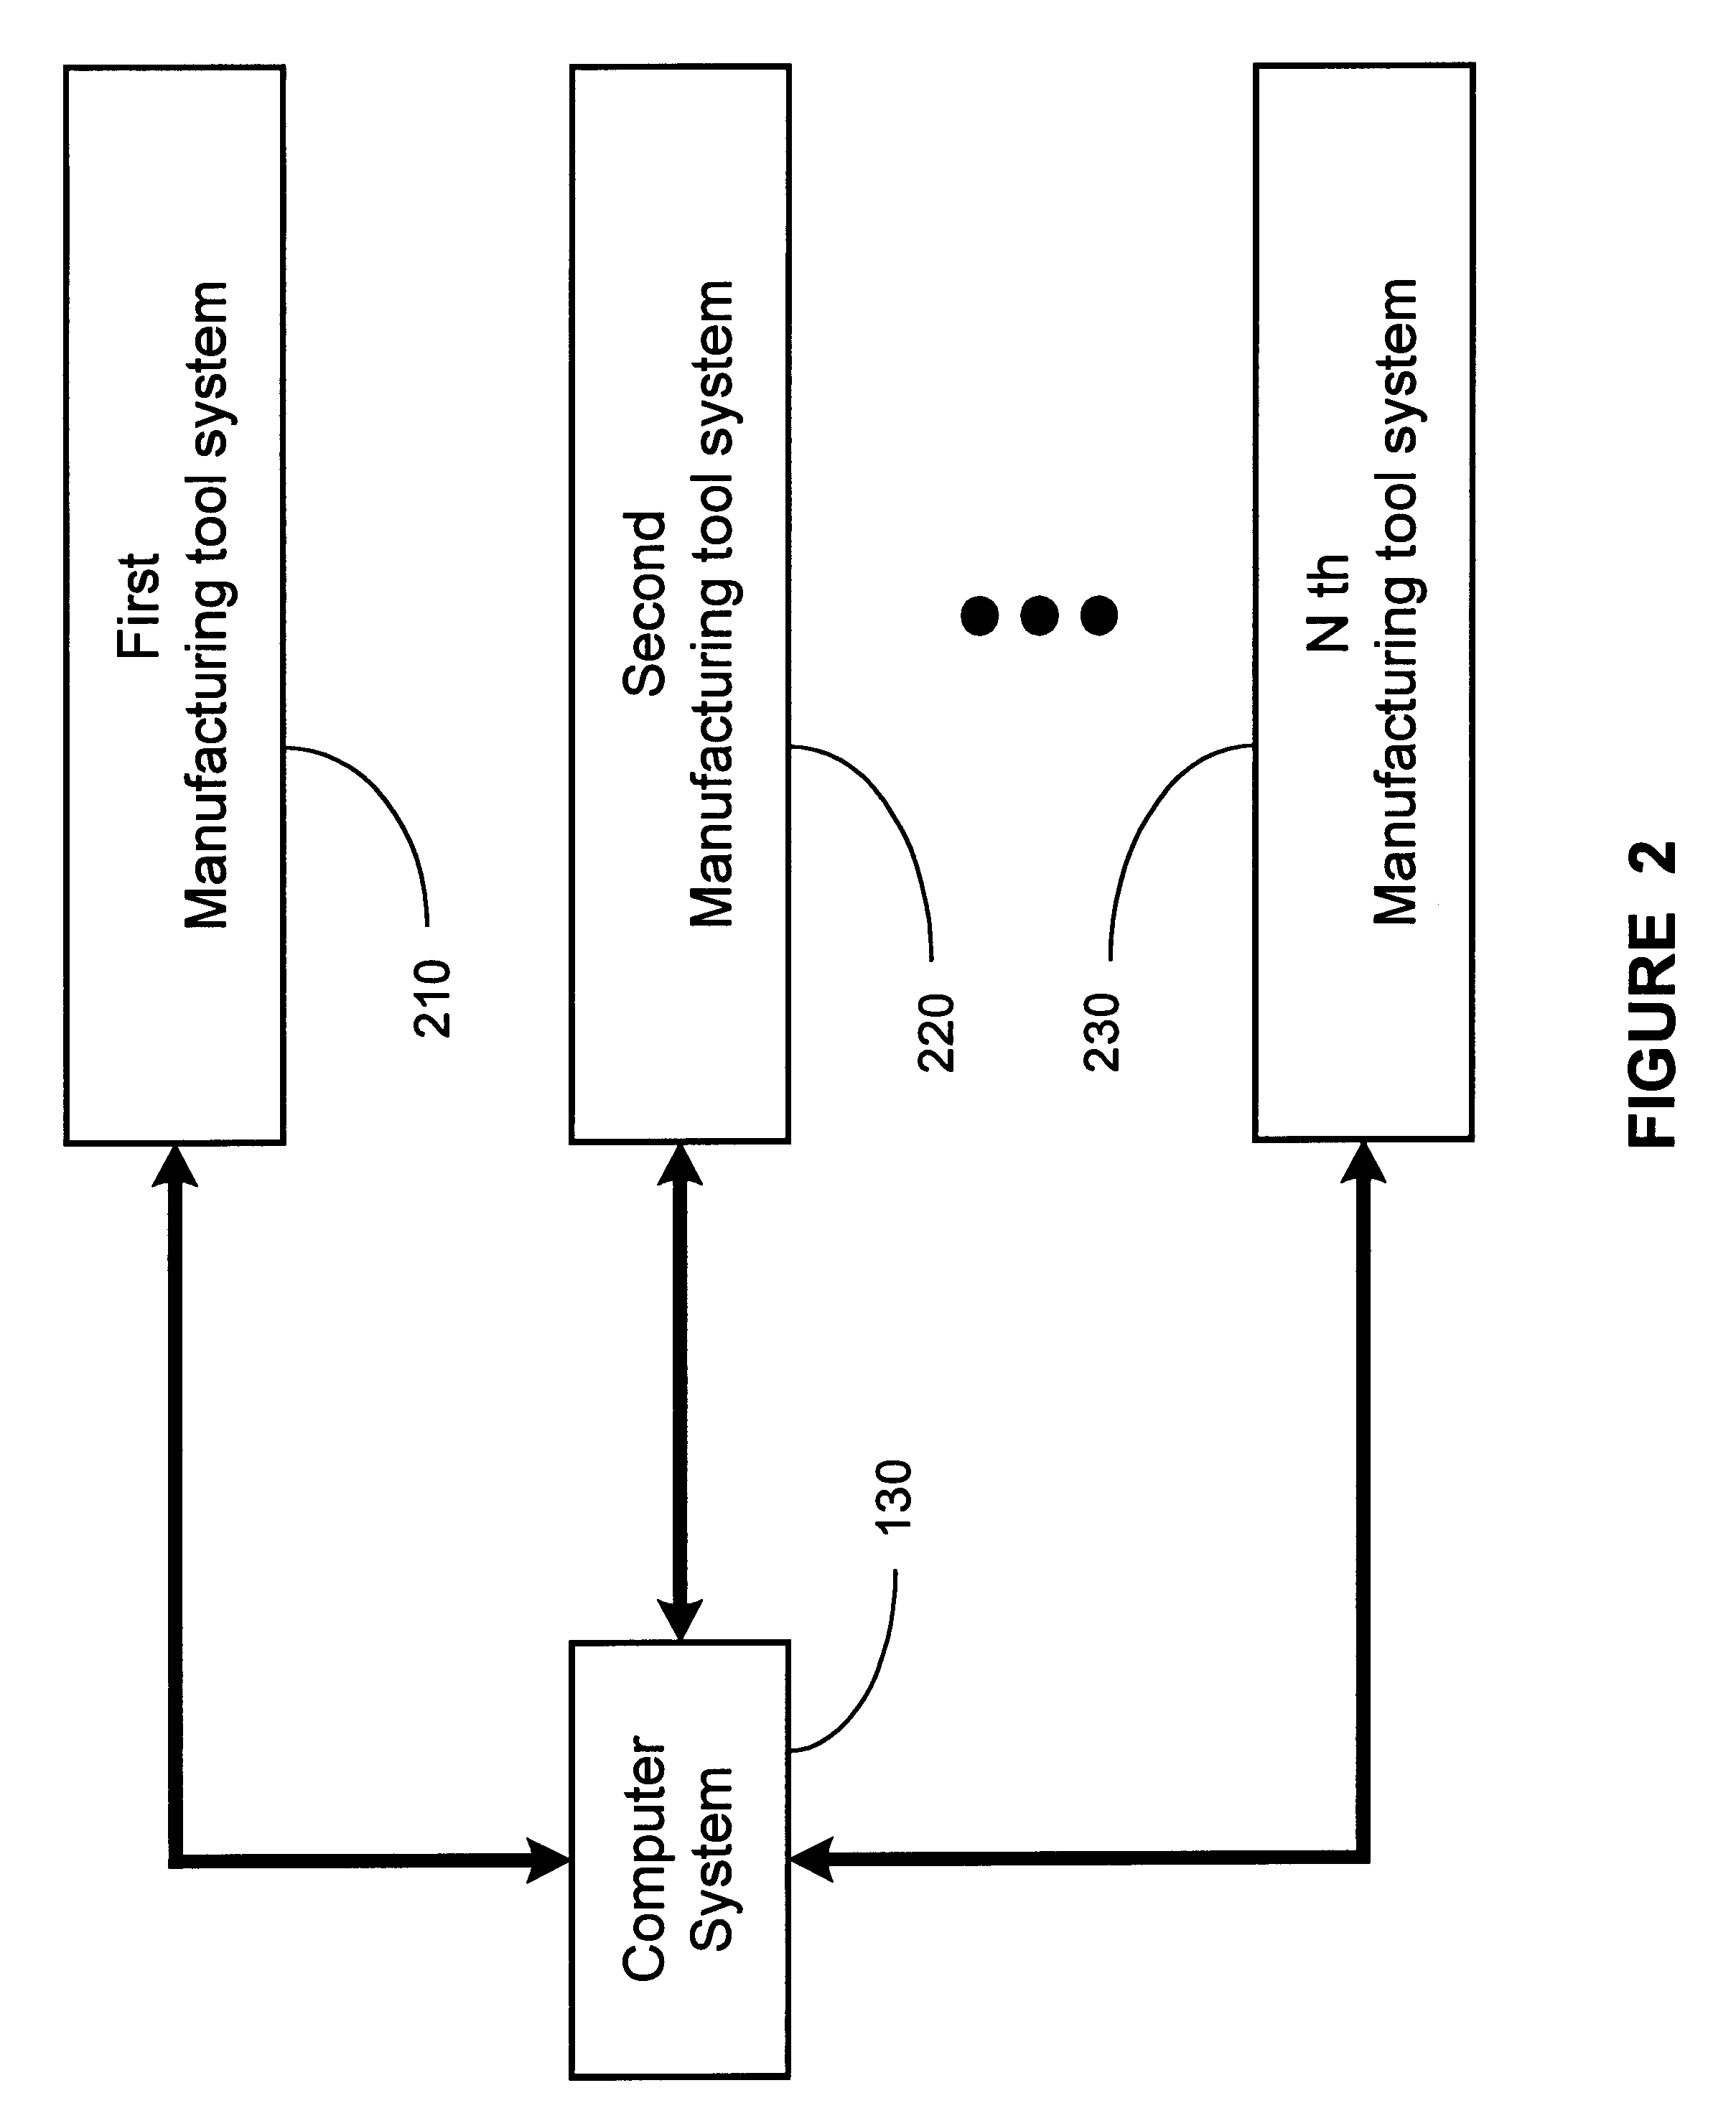 Method and apparatus for embedded process control framework in tool systems